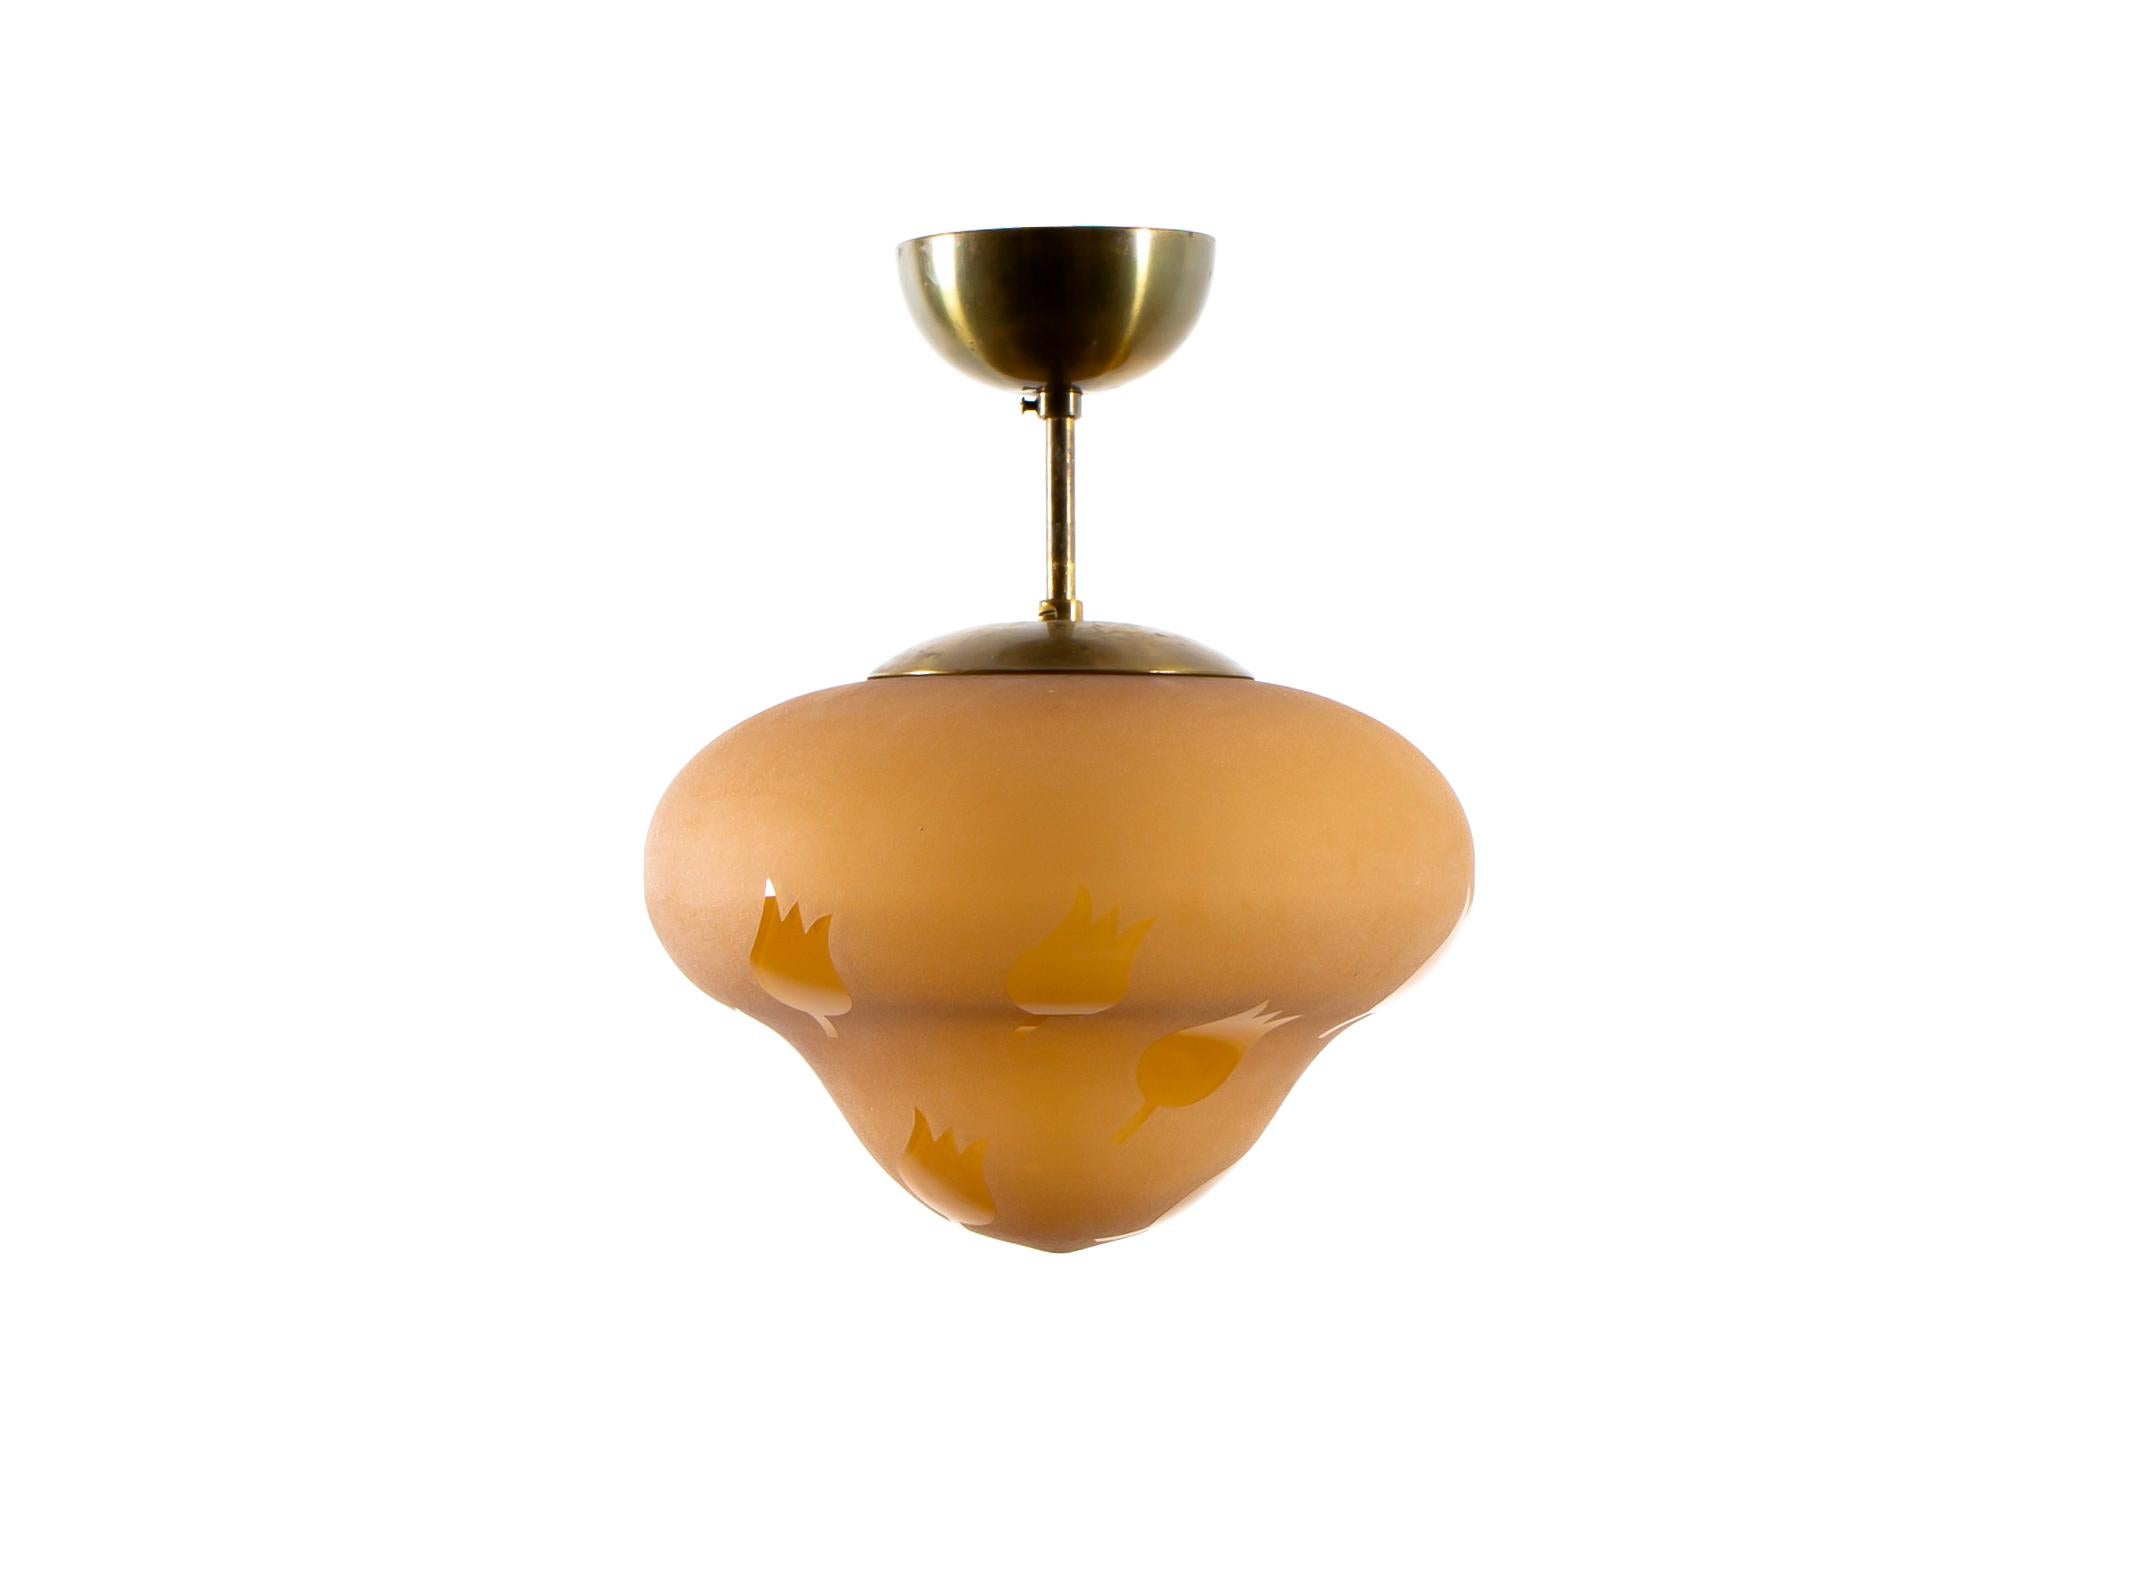 Modernist ceiling light in brass with decorated shades in blown glass. Designed and made in Norway from cirka 1950s second half. The lamp is fully working and in good vintage condition. It is fitted with one E27 bulb holder (works in the US), with a